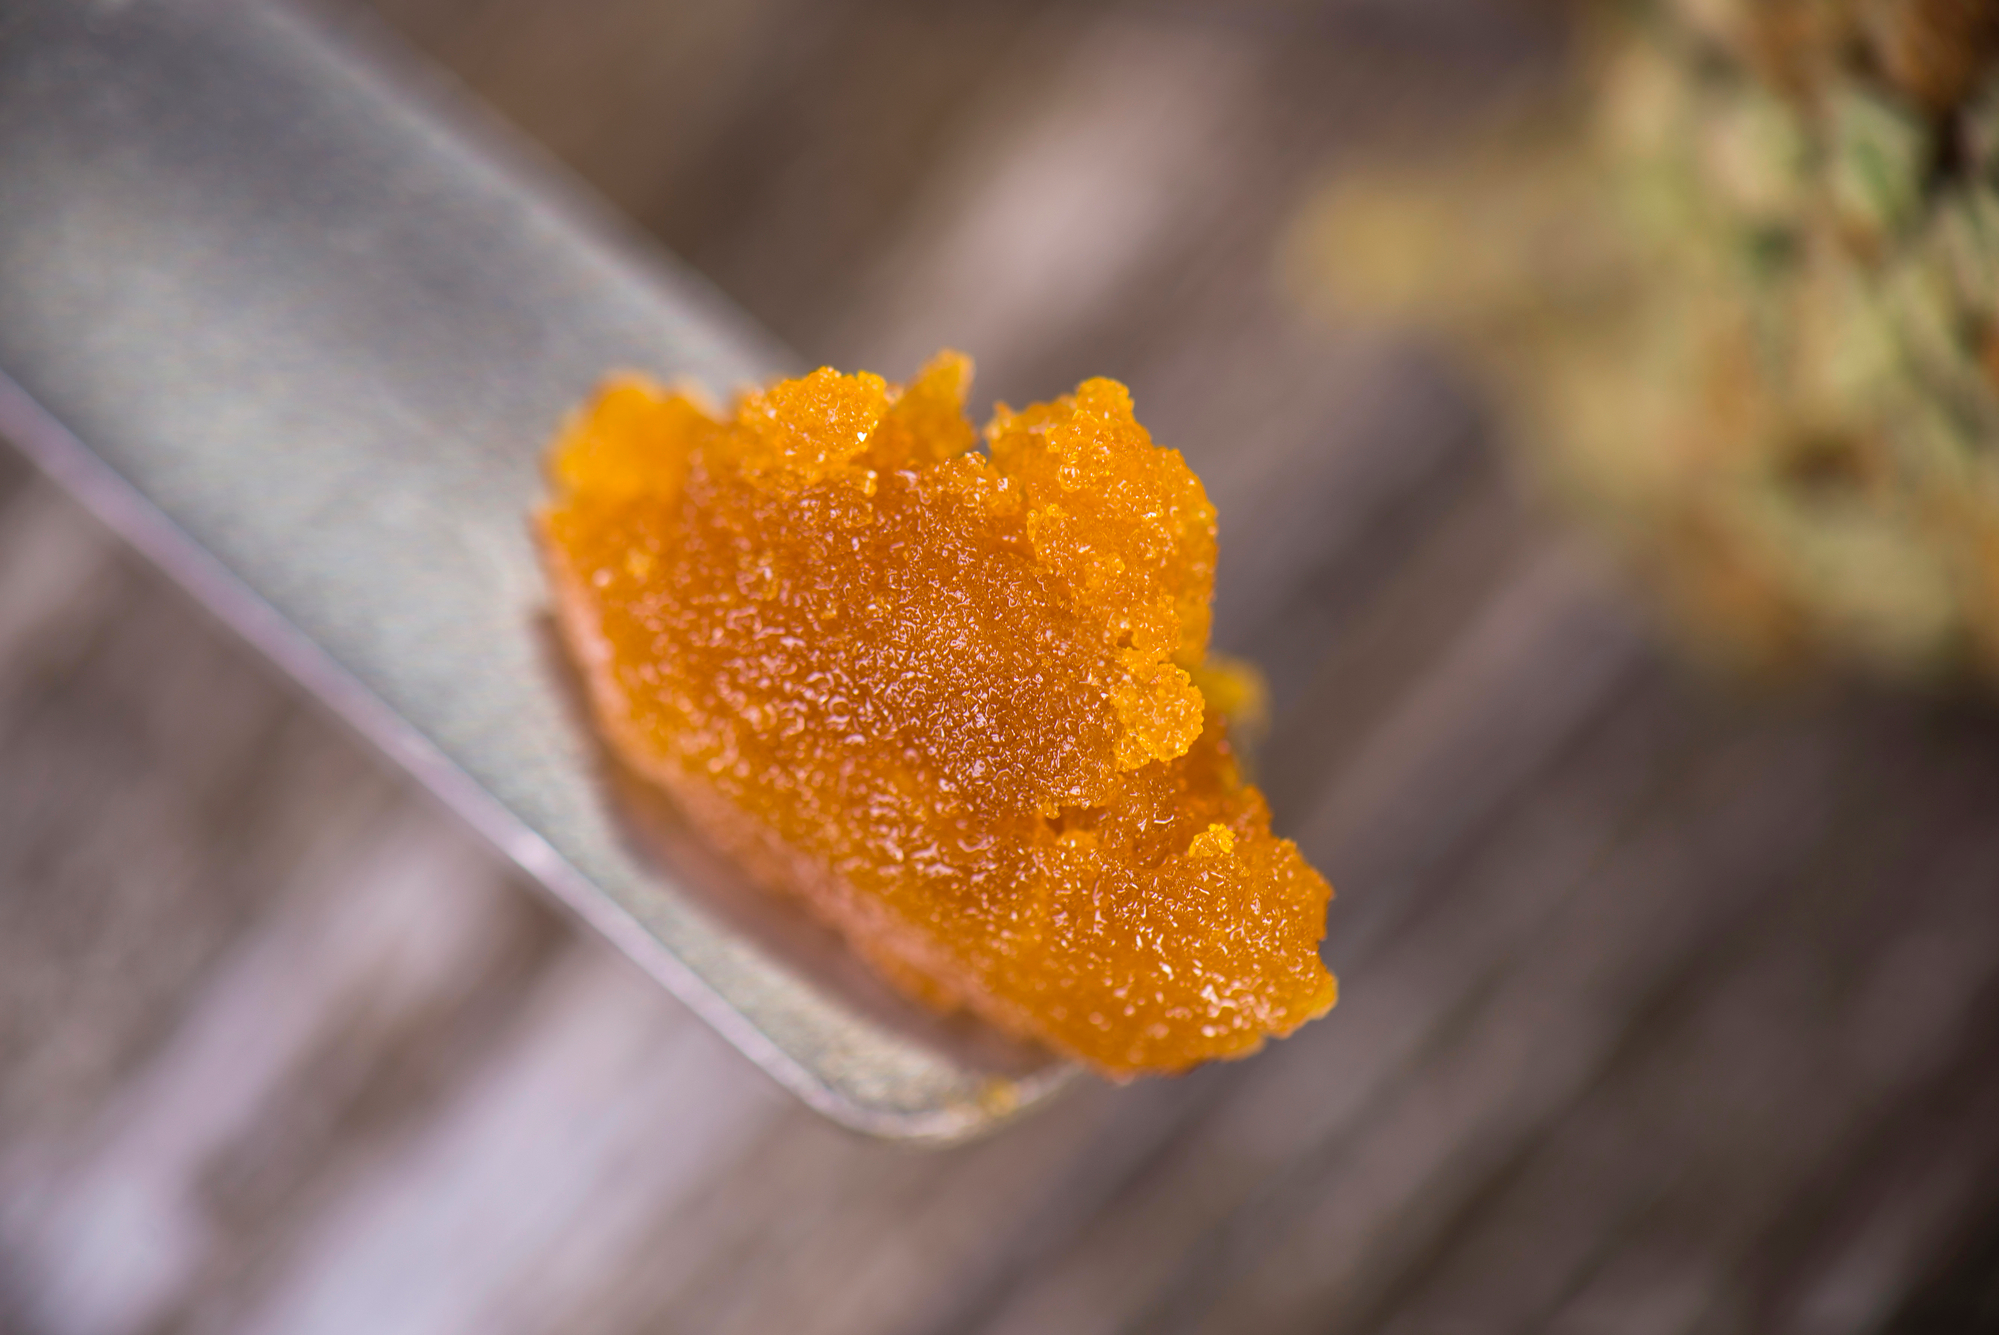 Live resin cannabis concentrate